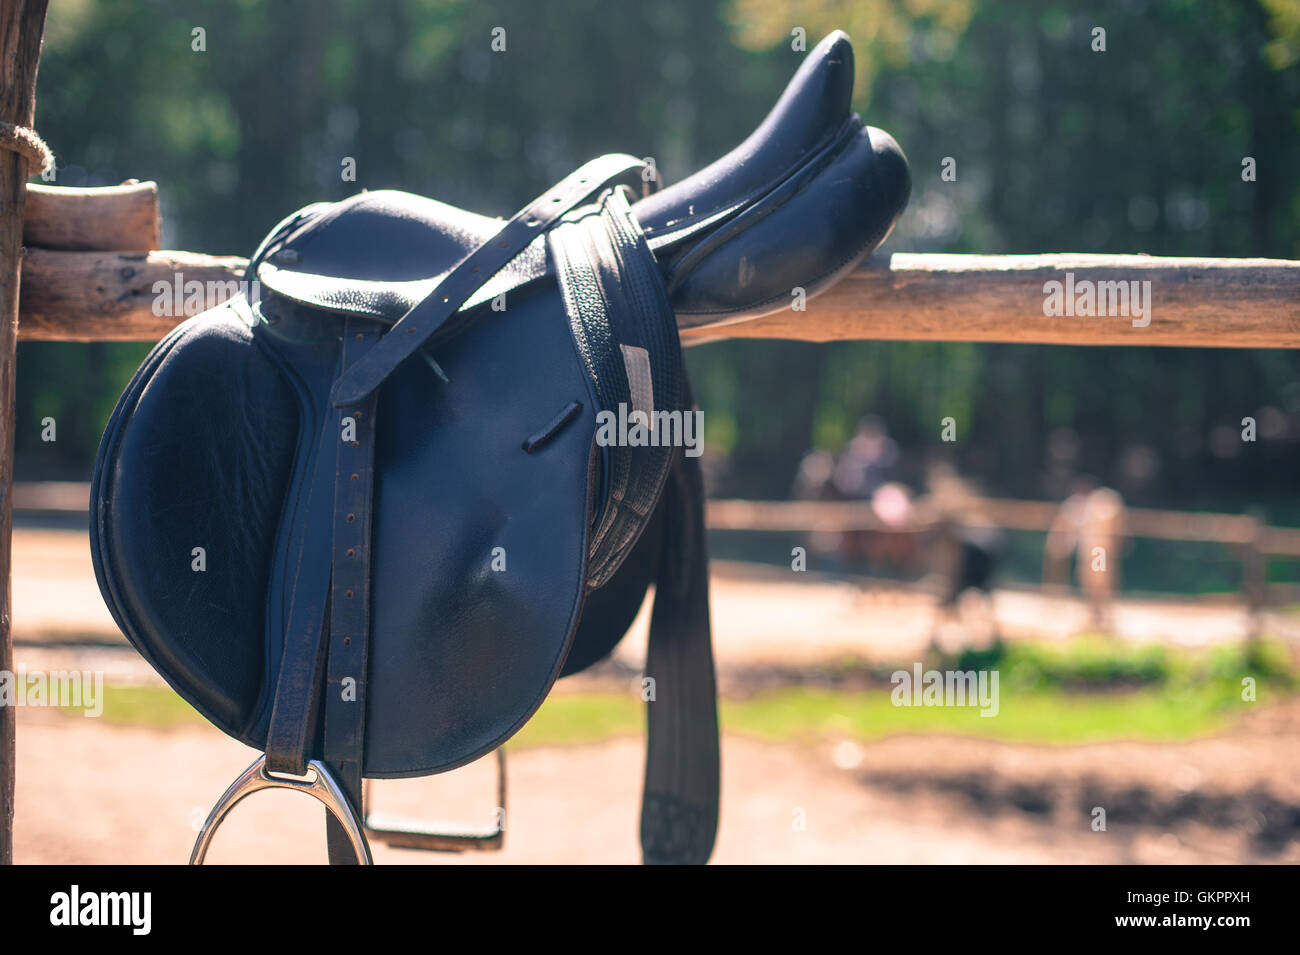 Horse saddle close up on stables fence out of focus background with people riding autumnal colors Stock Photo